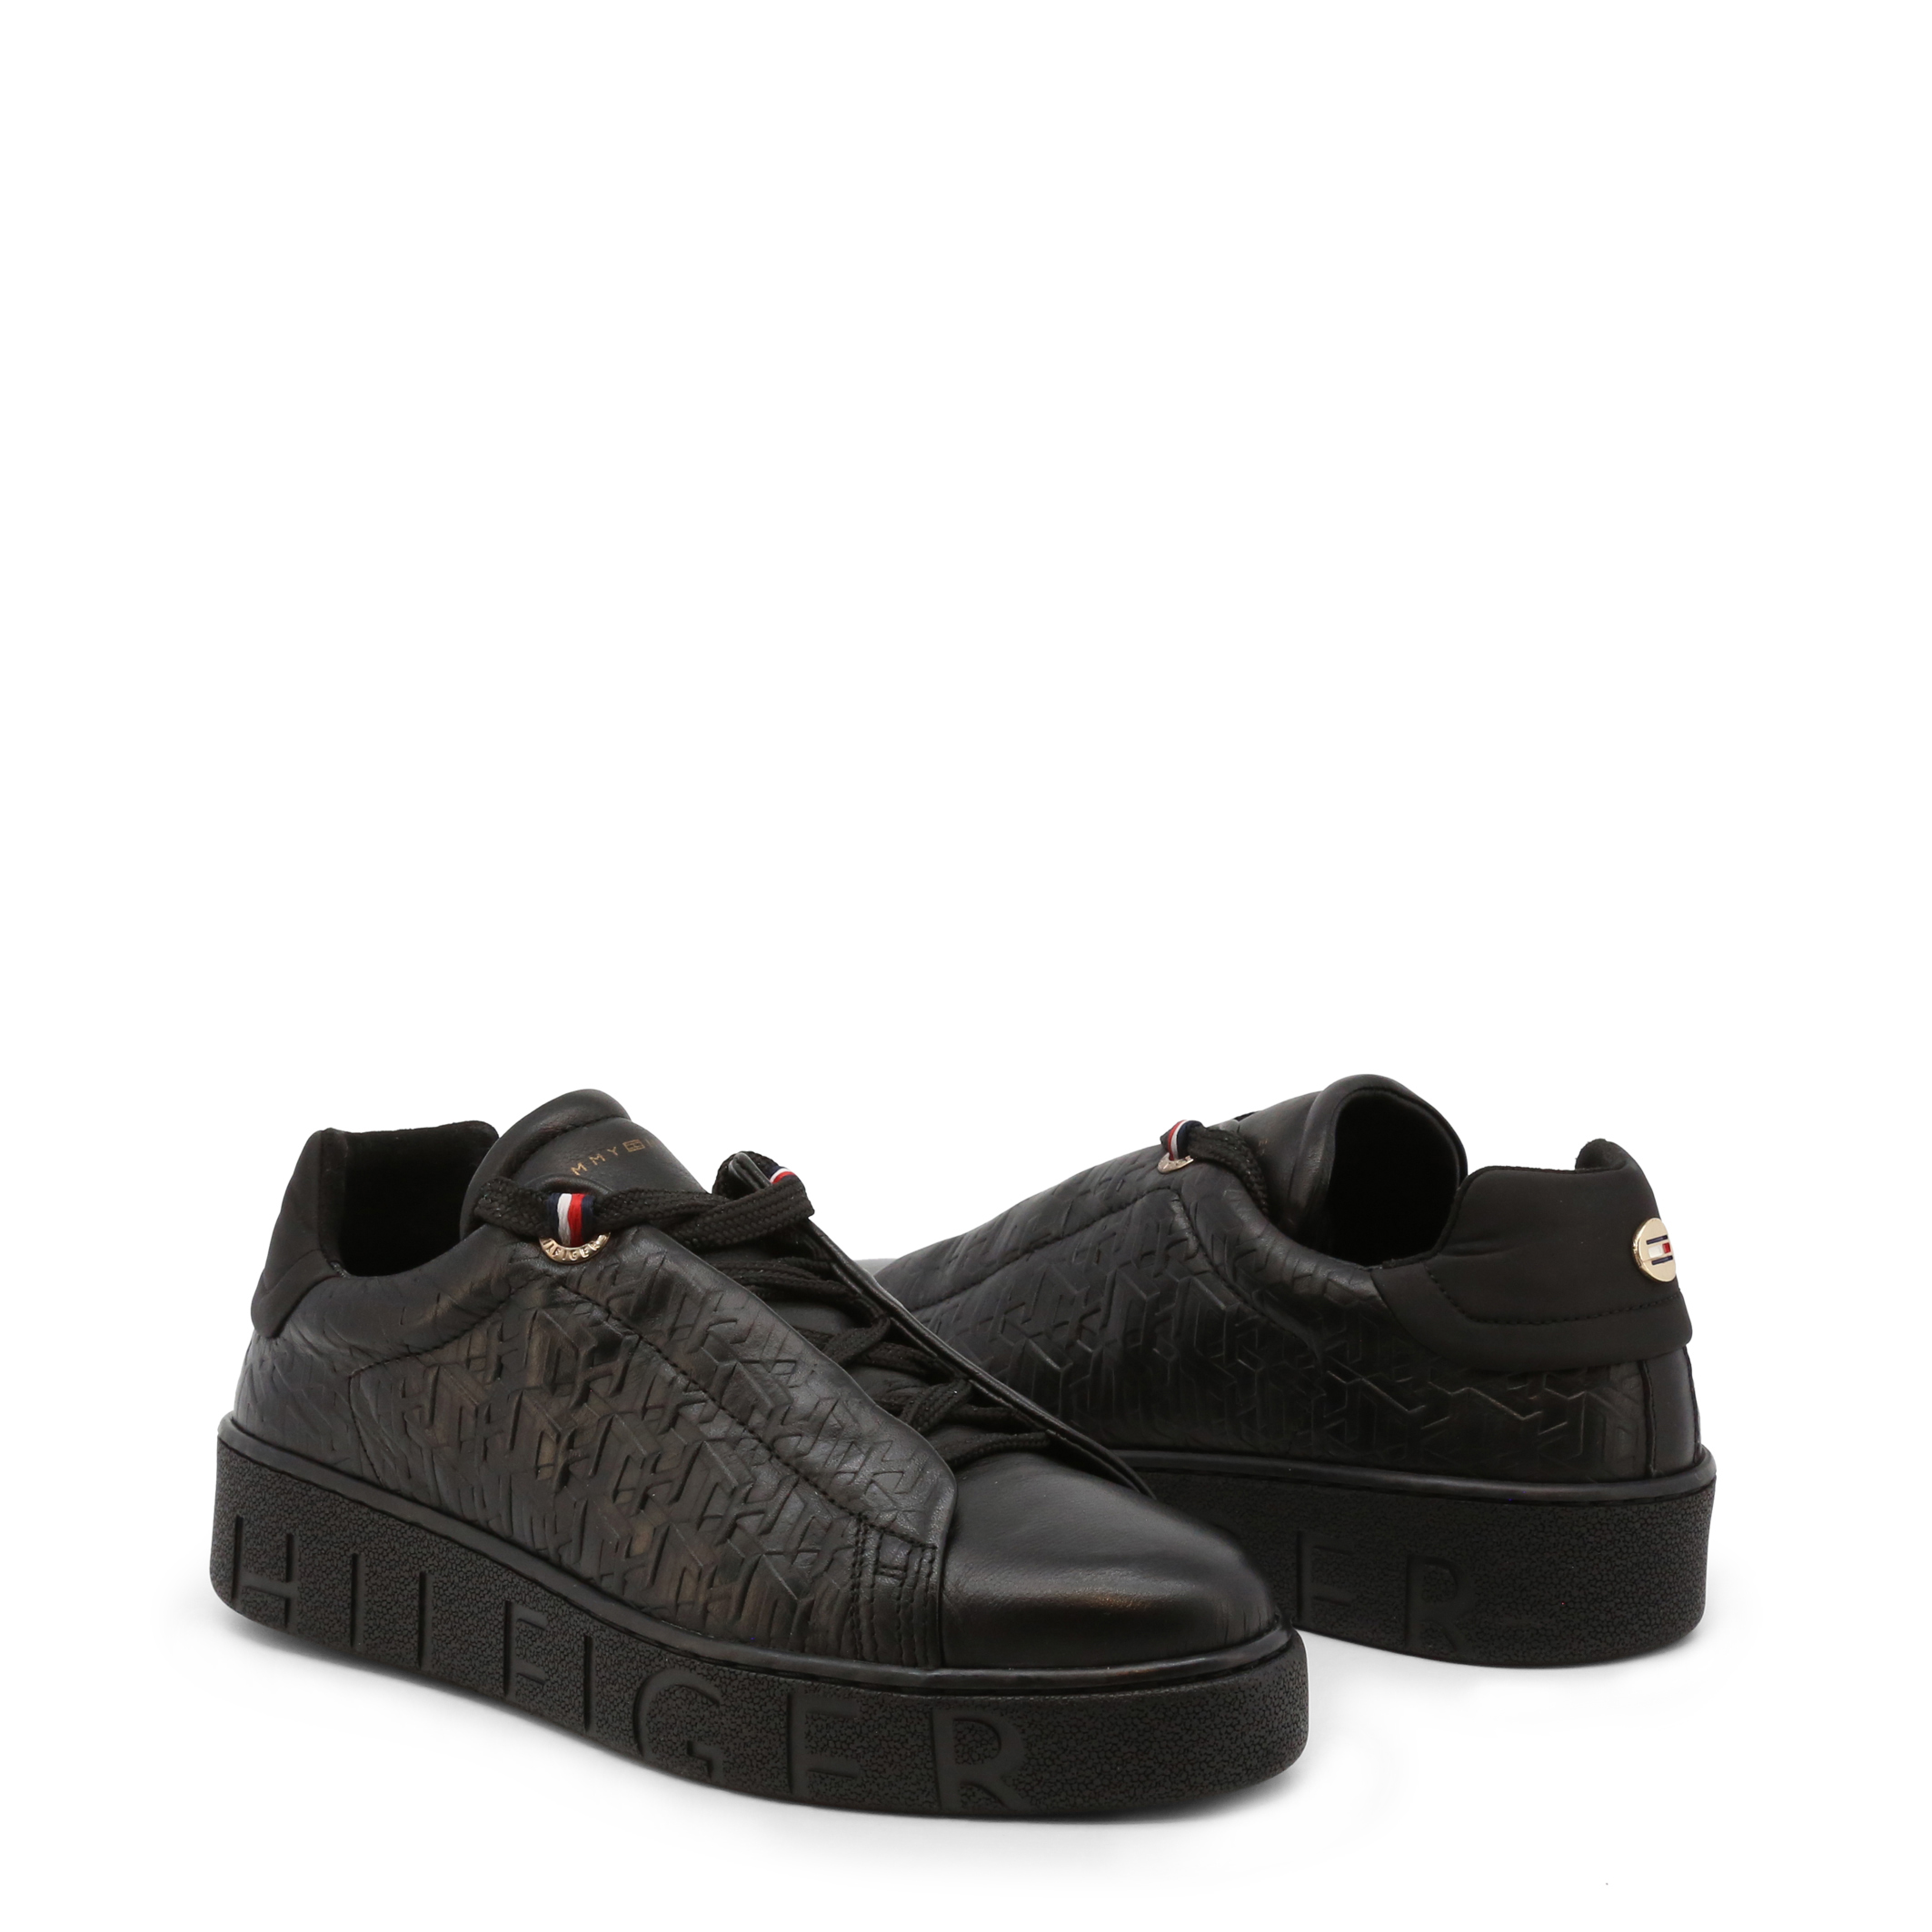 Tommy Hilfiger Black Sneakers for Women - FW0FW04290